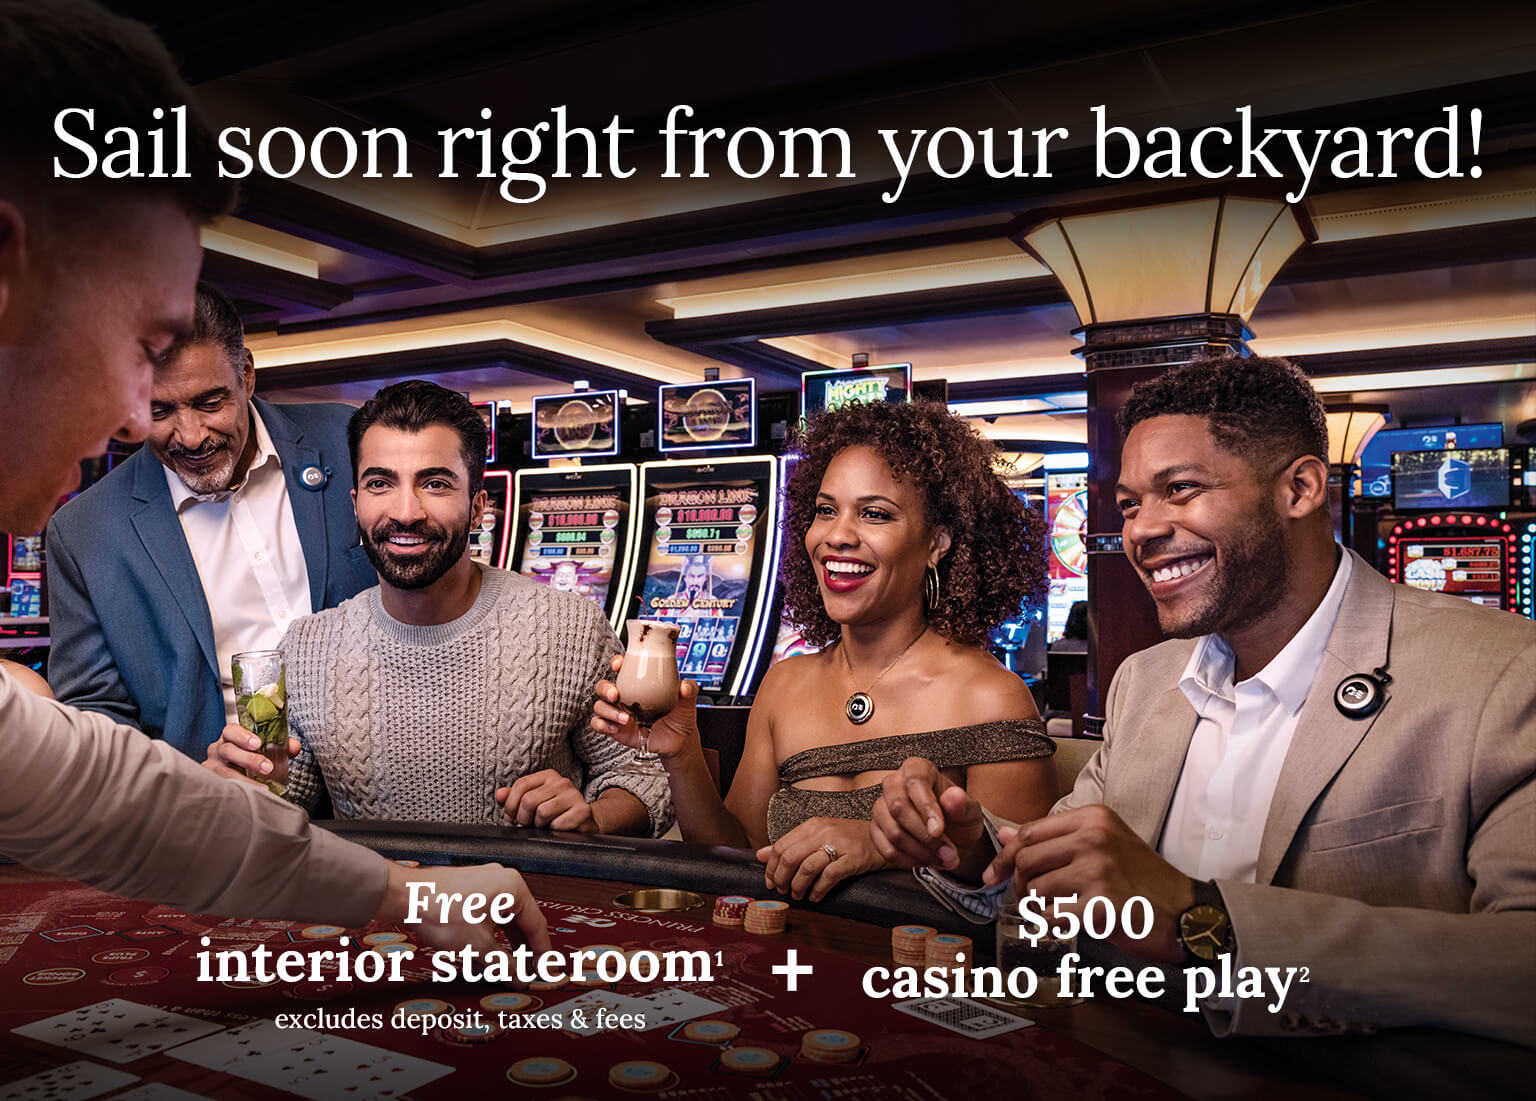 Enjoy a free interior stateroom + $500 casino free play. Click here to book.